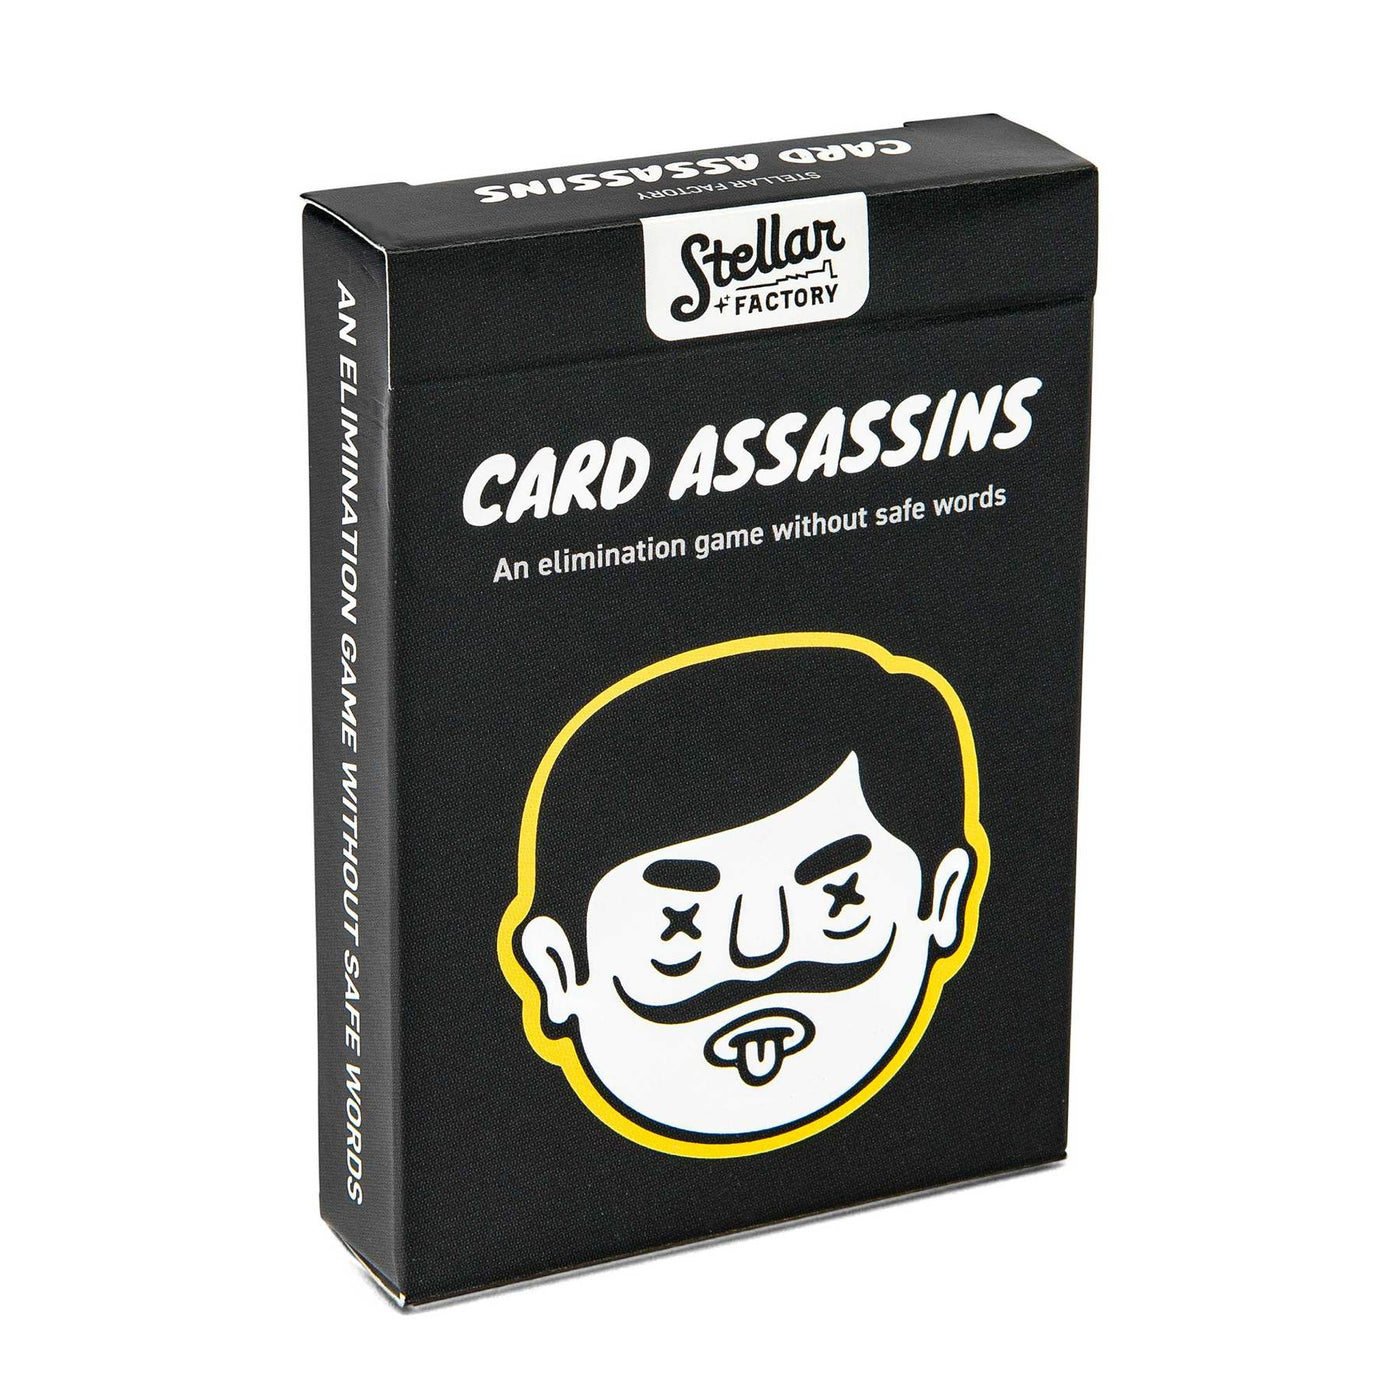 Front of Packaging for Card Assassins Game